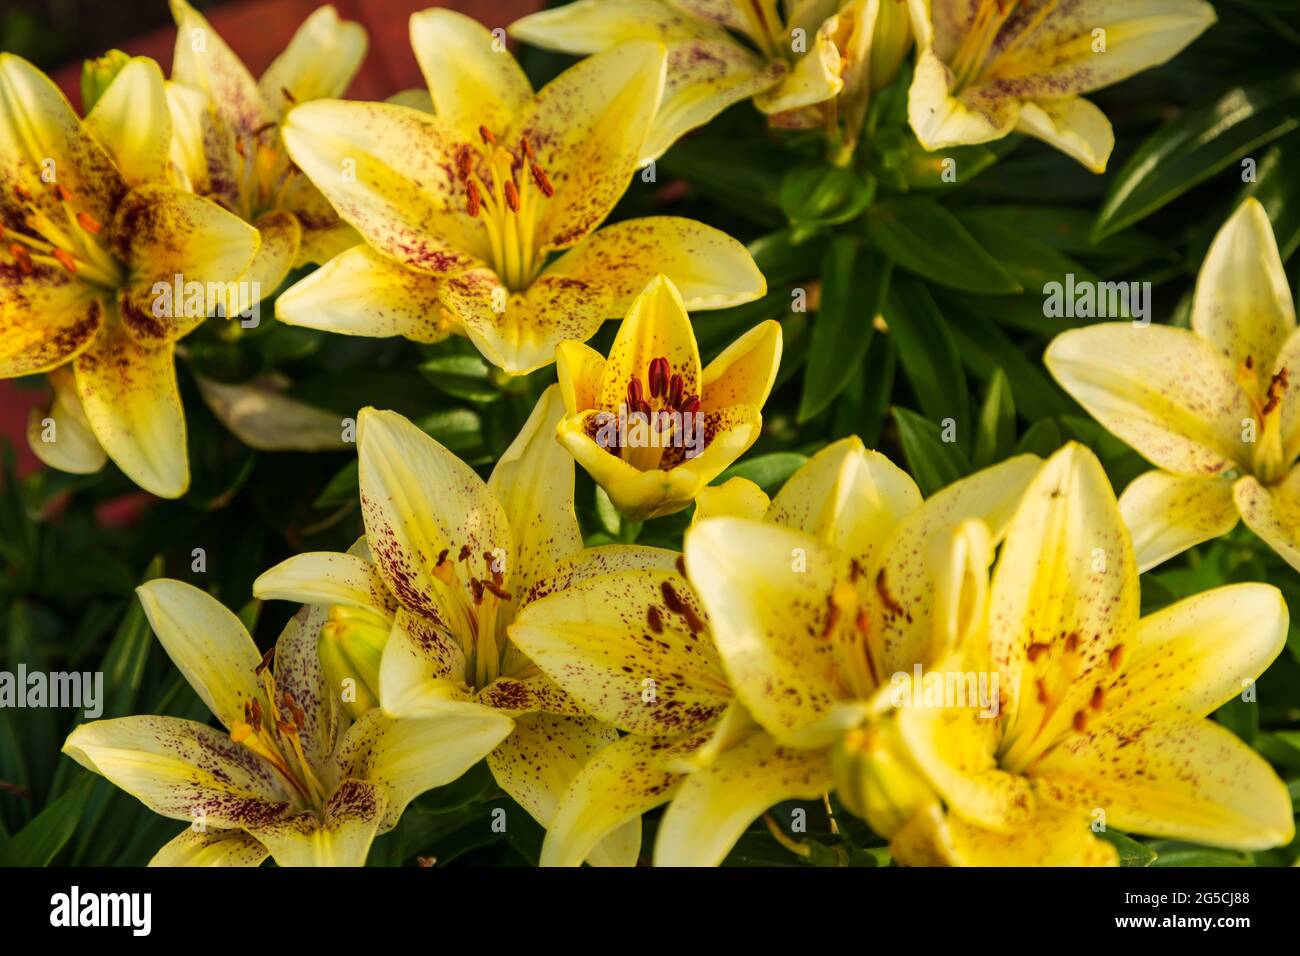 a cluster of a light yellow lilies with red spots Stock Photo